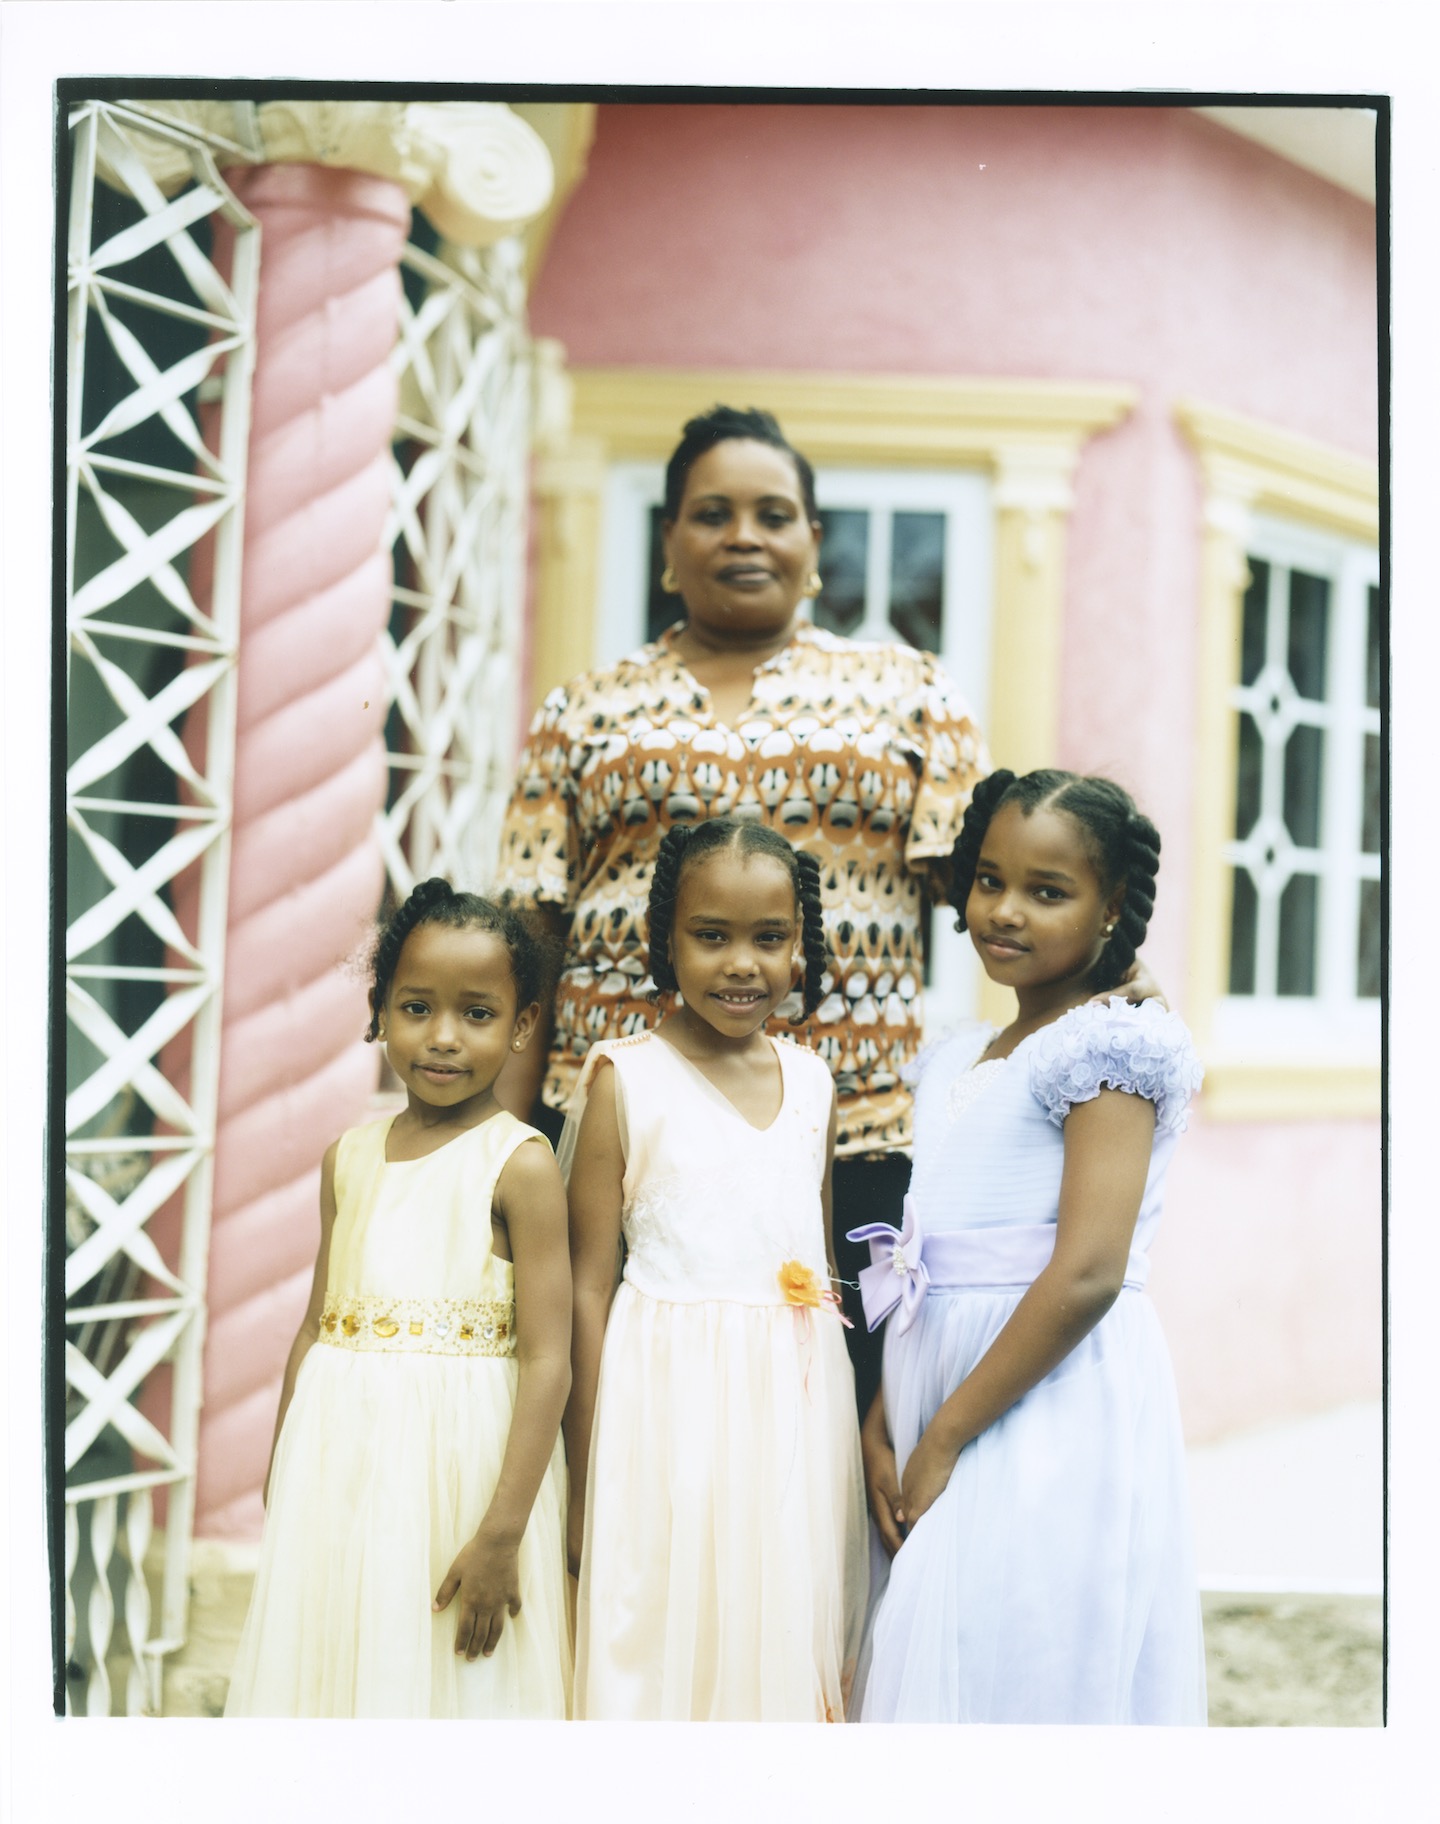 An older woman poses with her three daughters, all wearing dresses, outside a pink house.